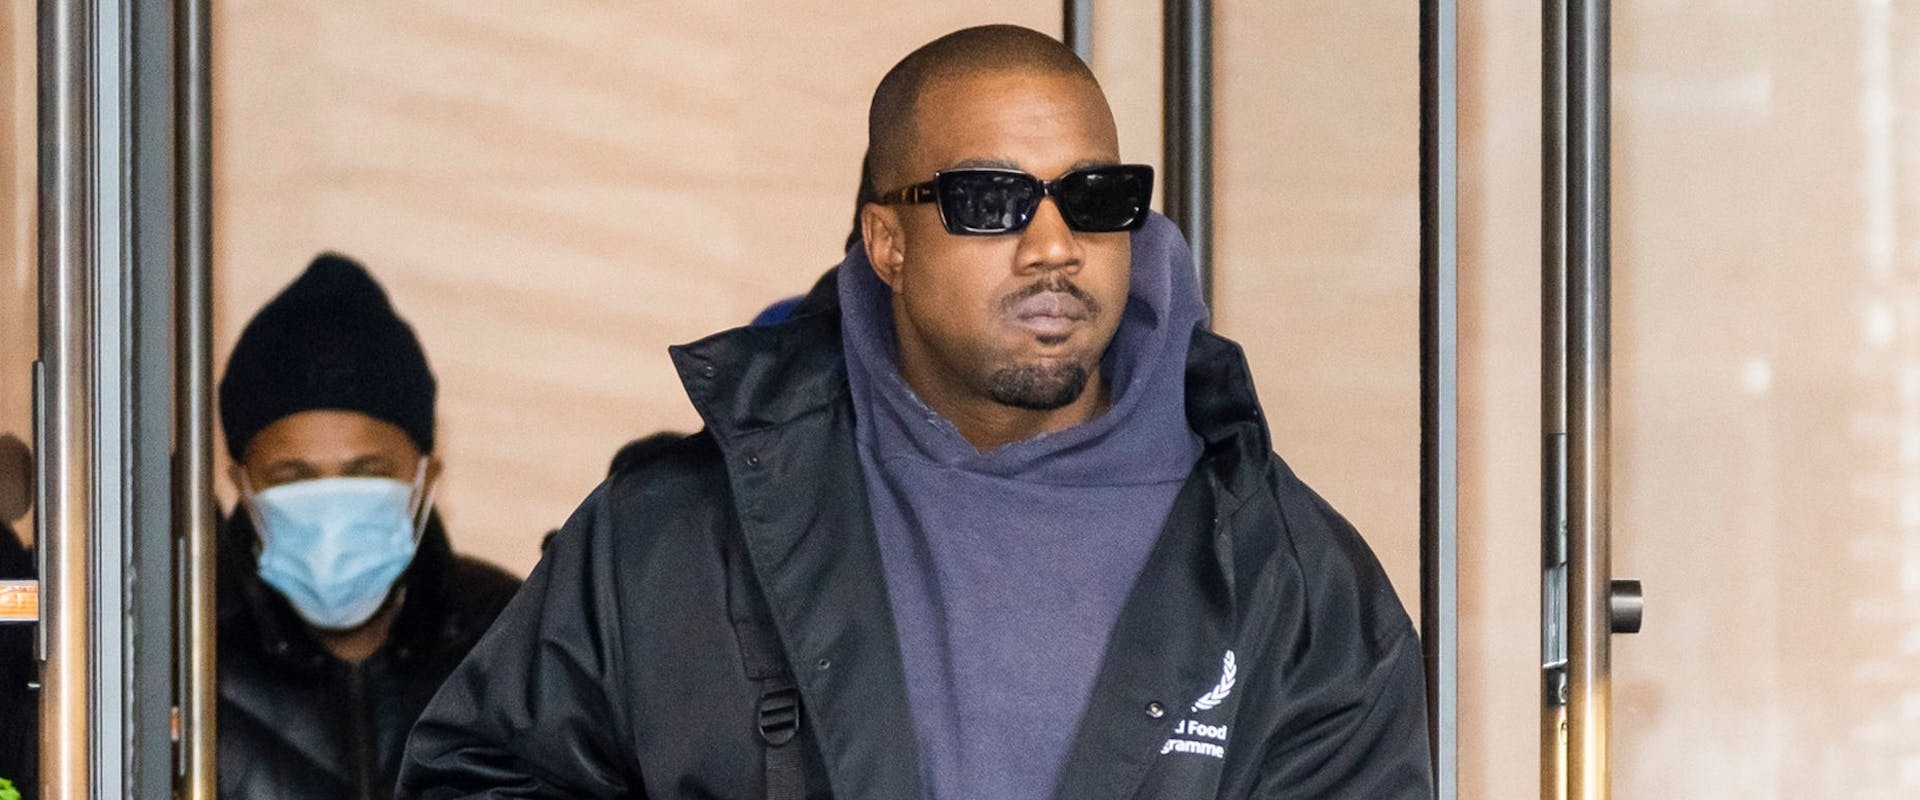 Kanye West is seen in Chelsea on January 05, 2022 in New York City. 